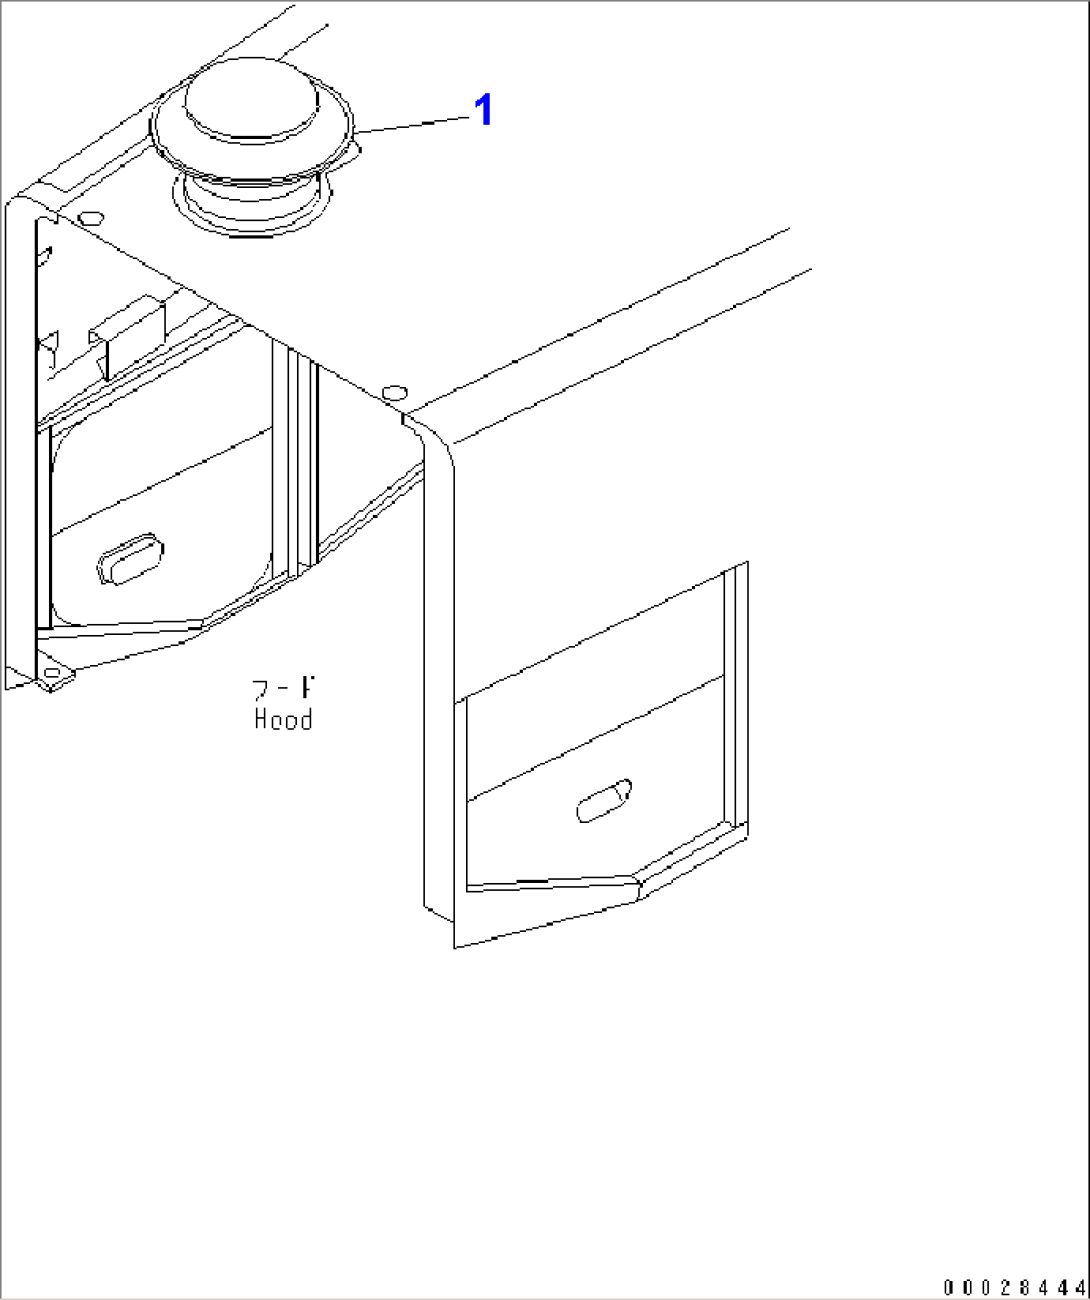 RADIATOR GUARD AND HOOD (WITH AIR INTAKE EXTENSION)